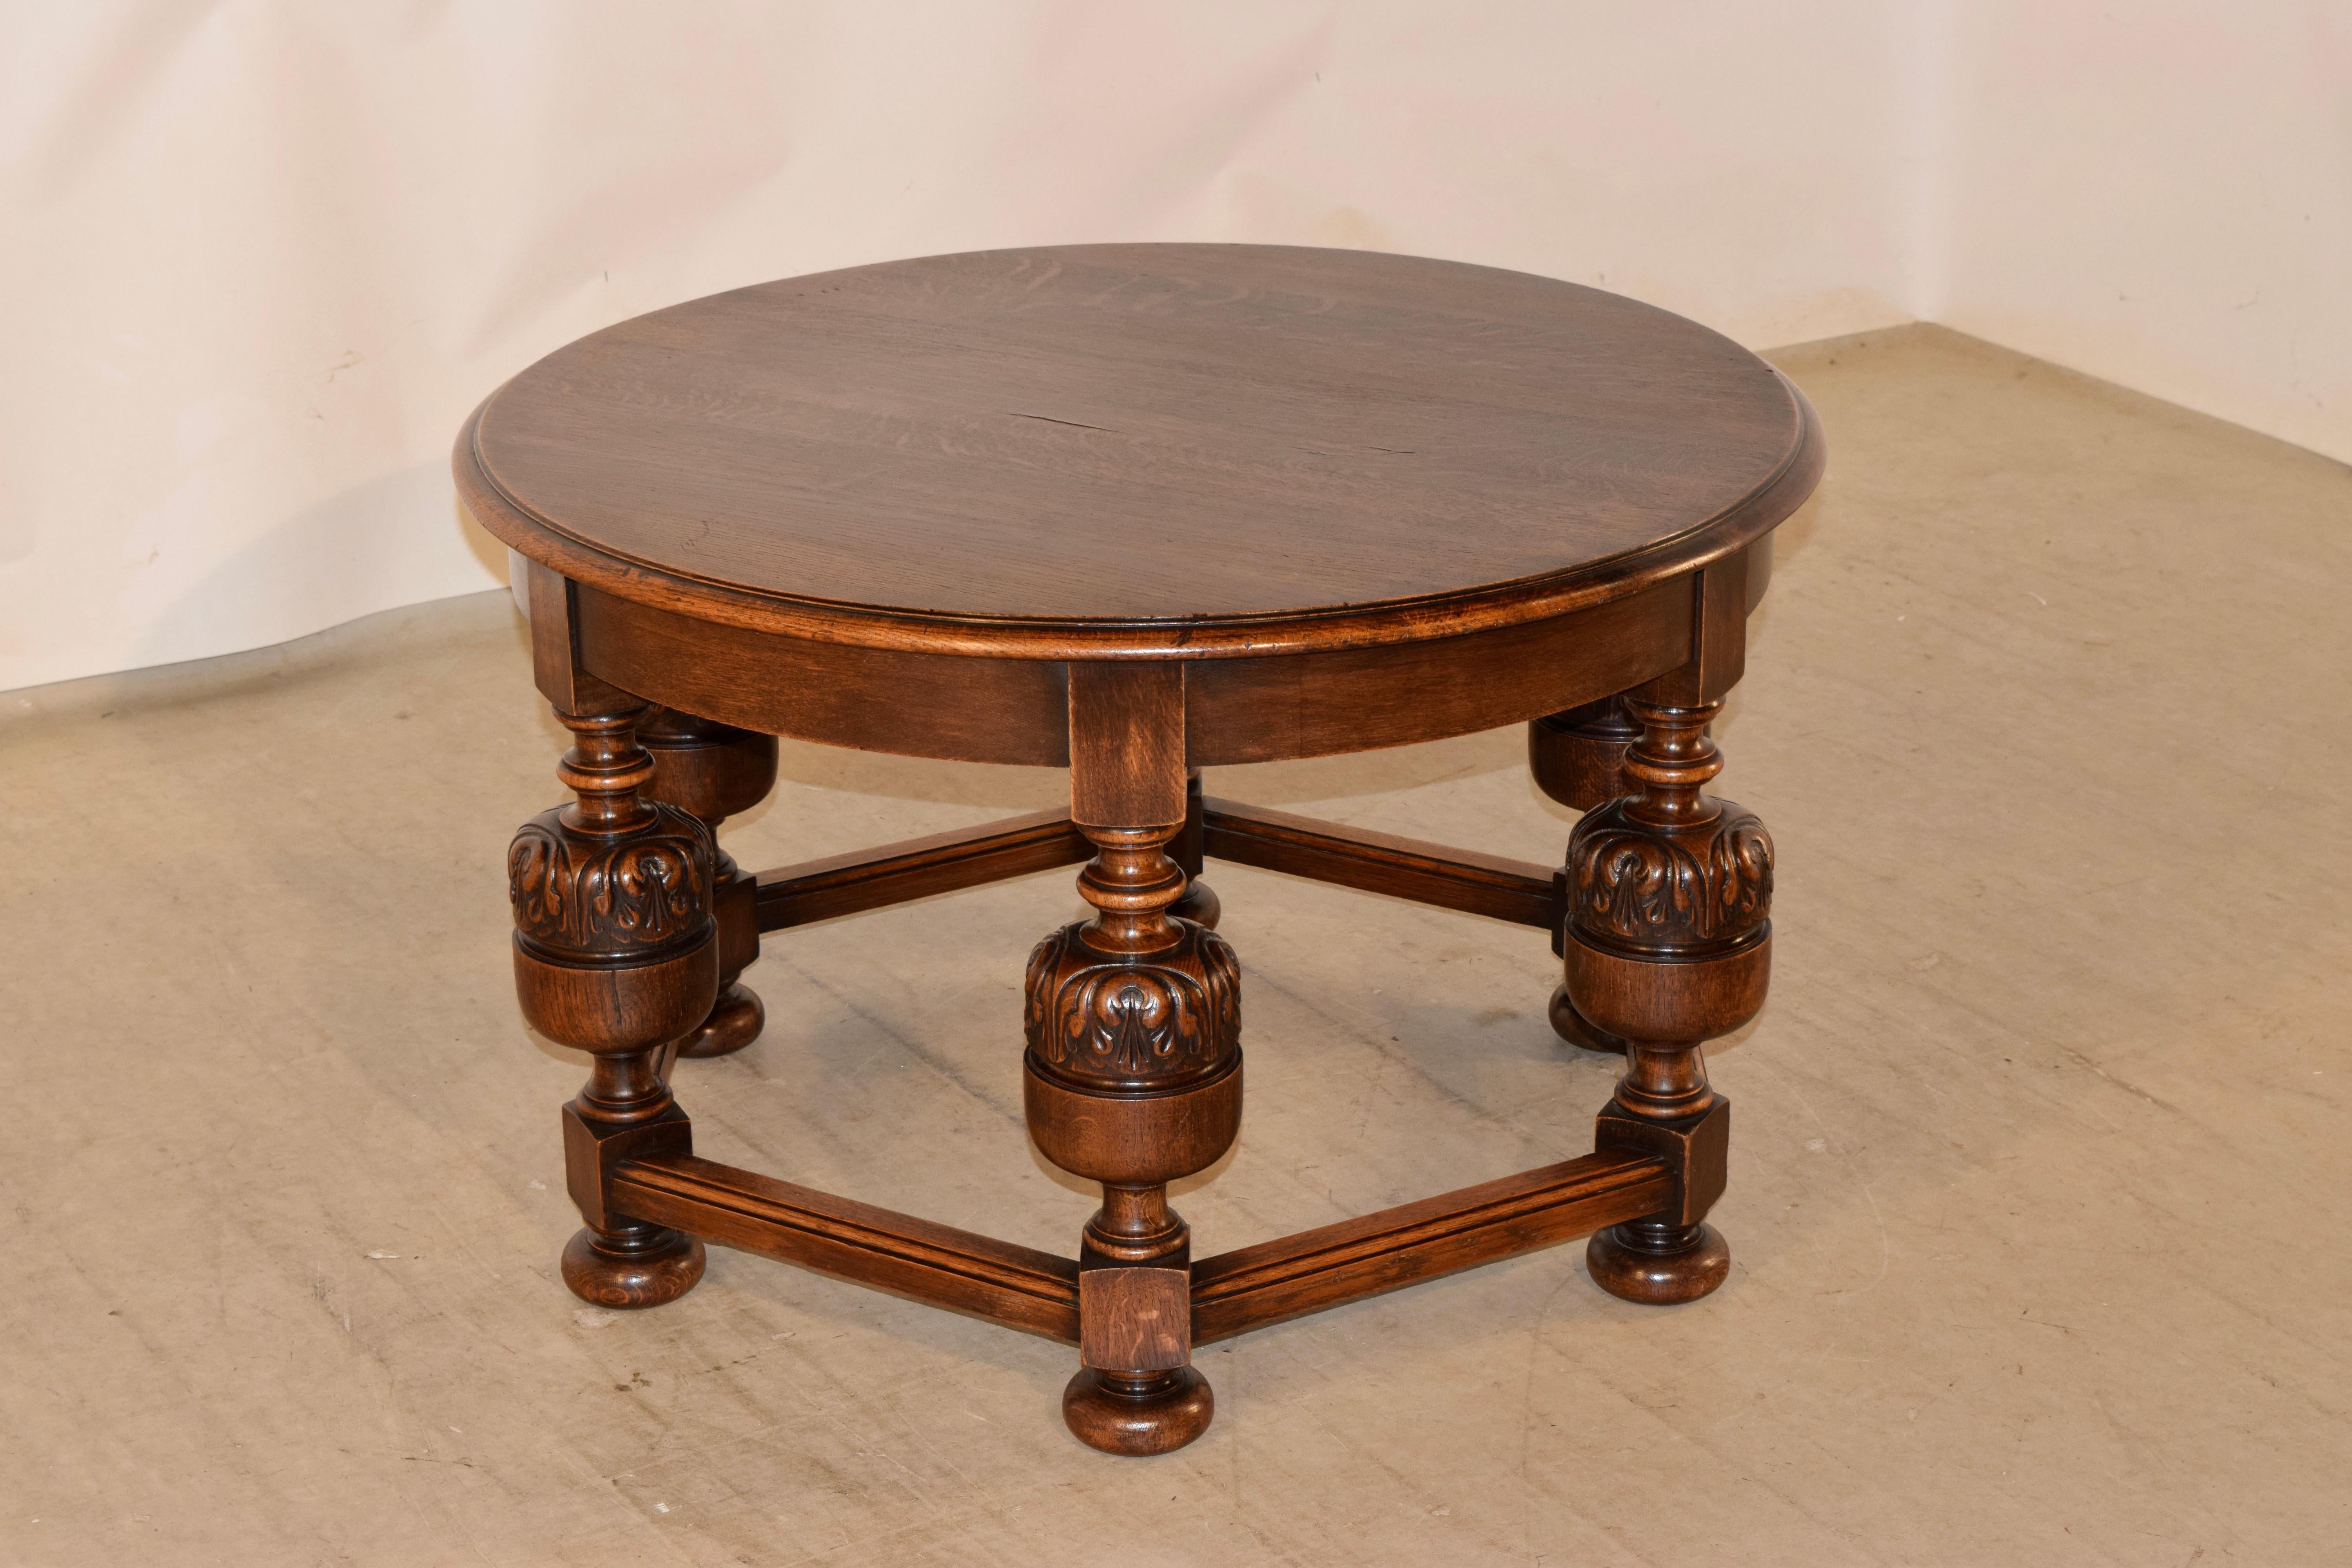 English oak cocktail table, circa 1900 with a wonderfully grained top in and a beveled and edge over thickly hand turned and carved decorated legs, joined by stout stretchers. Supported on hand turned bun feet.